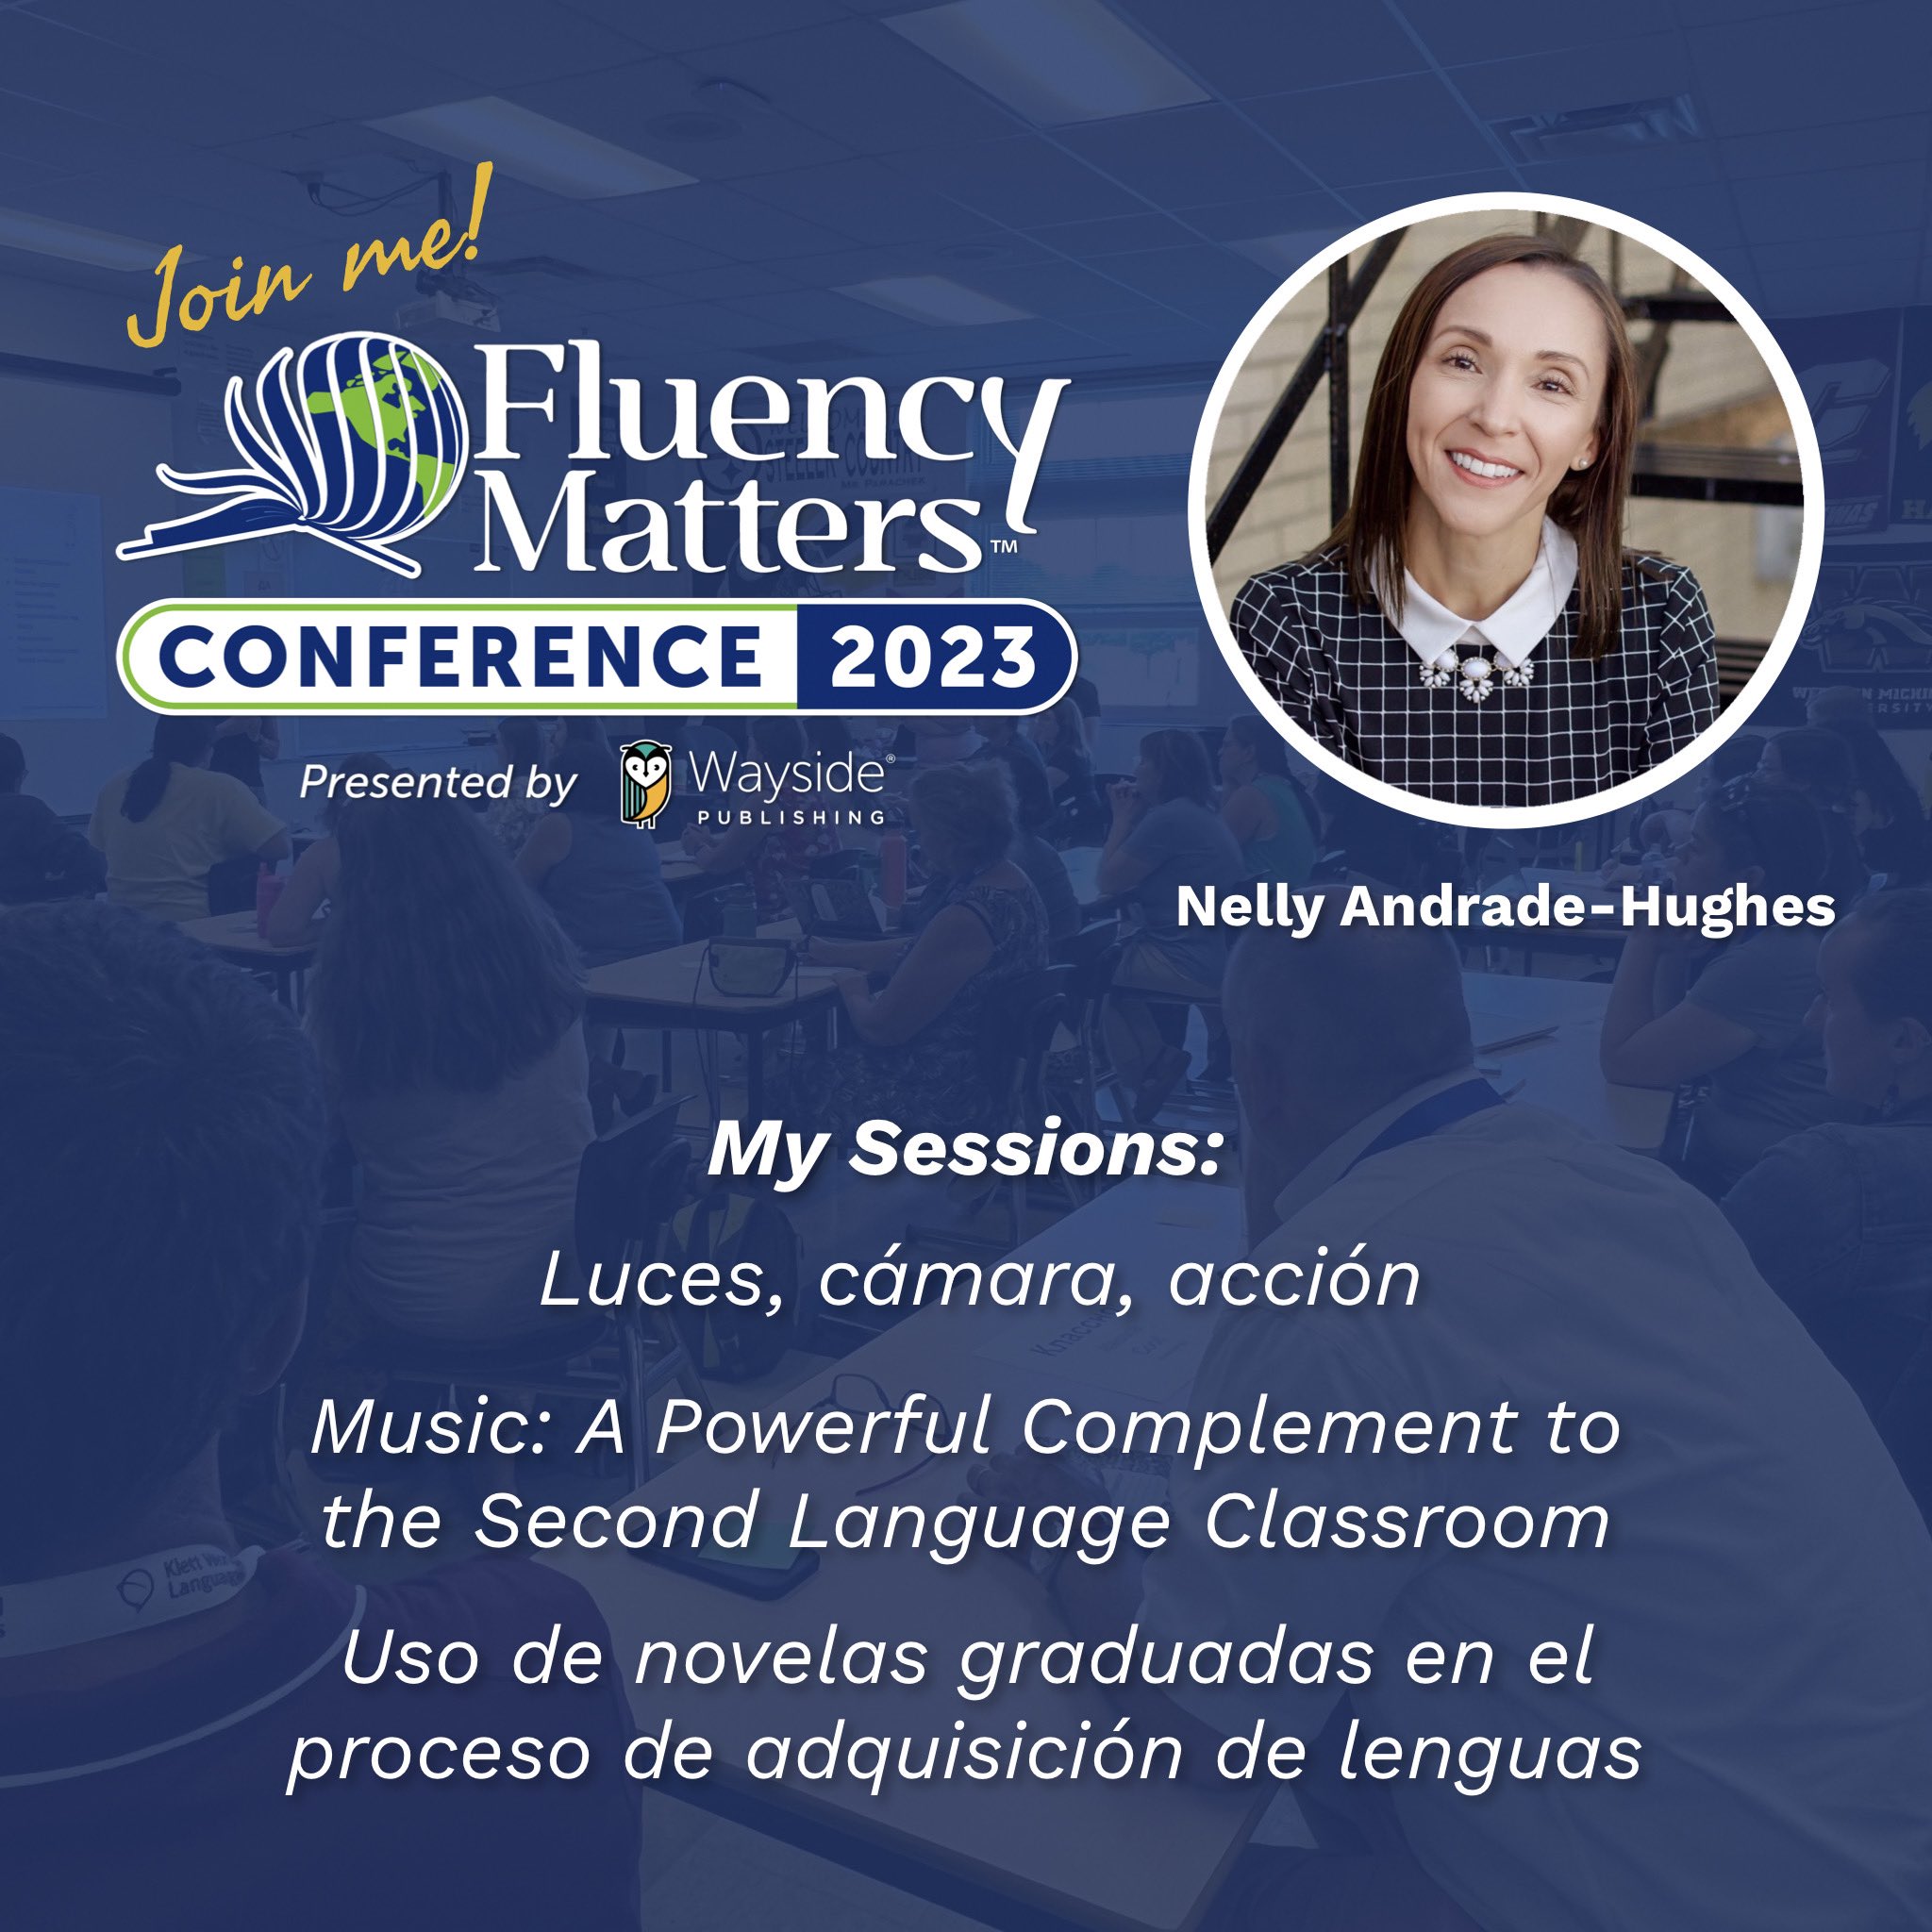 Fluency Matters on Twitter "Join Nelly AndradeHughes for her great